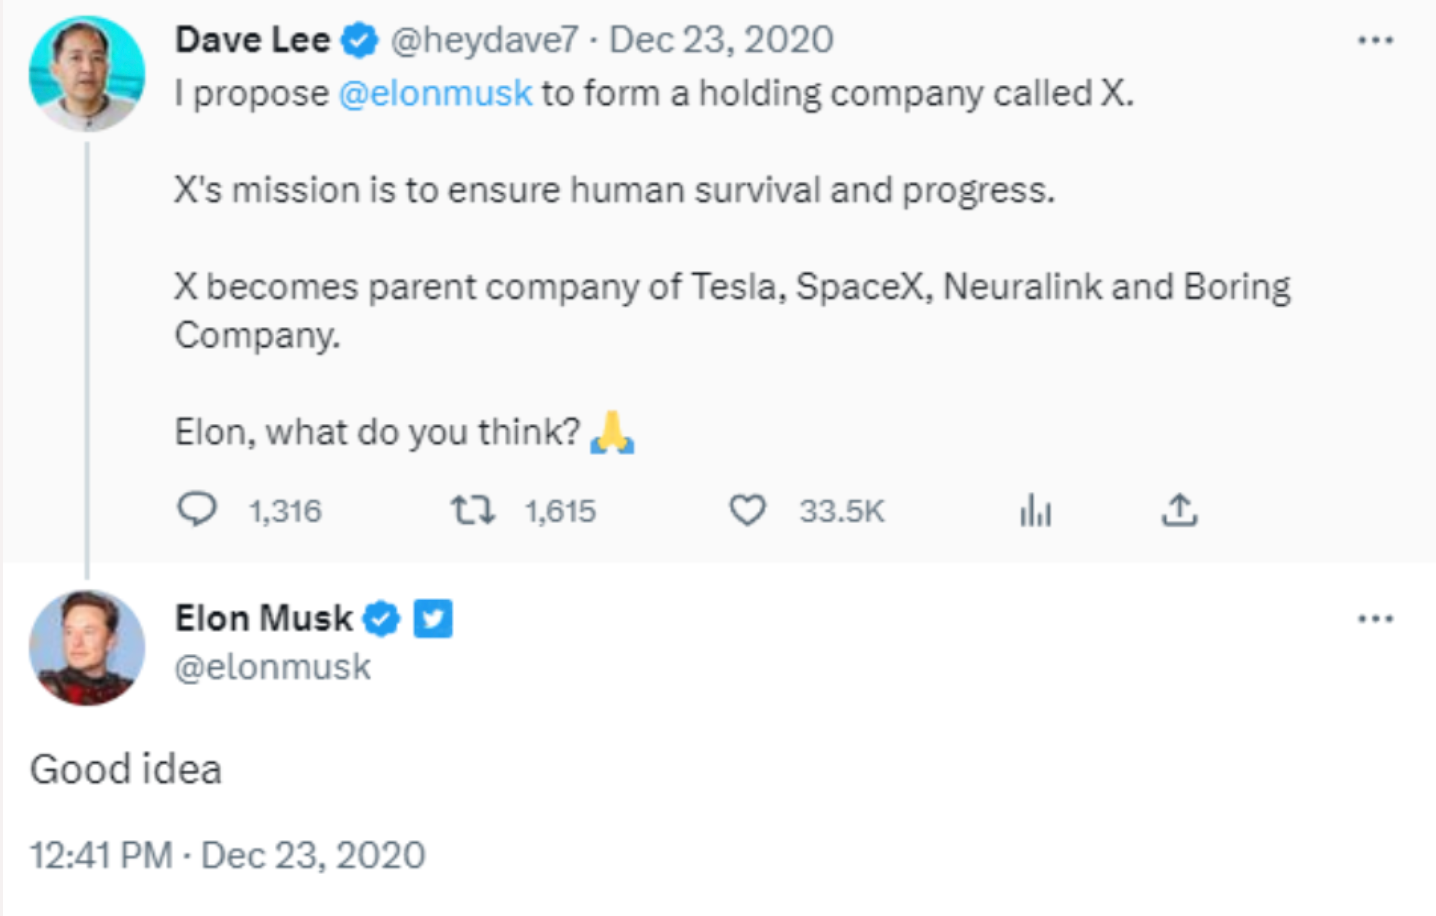 Elon Musk Responding to Dave Lee's tweet about X